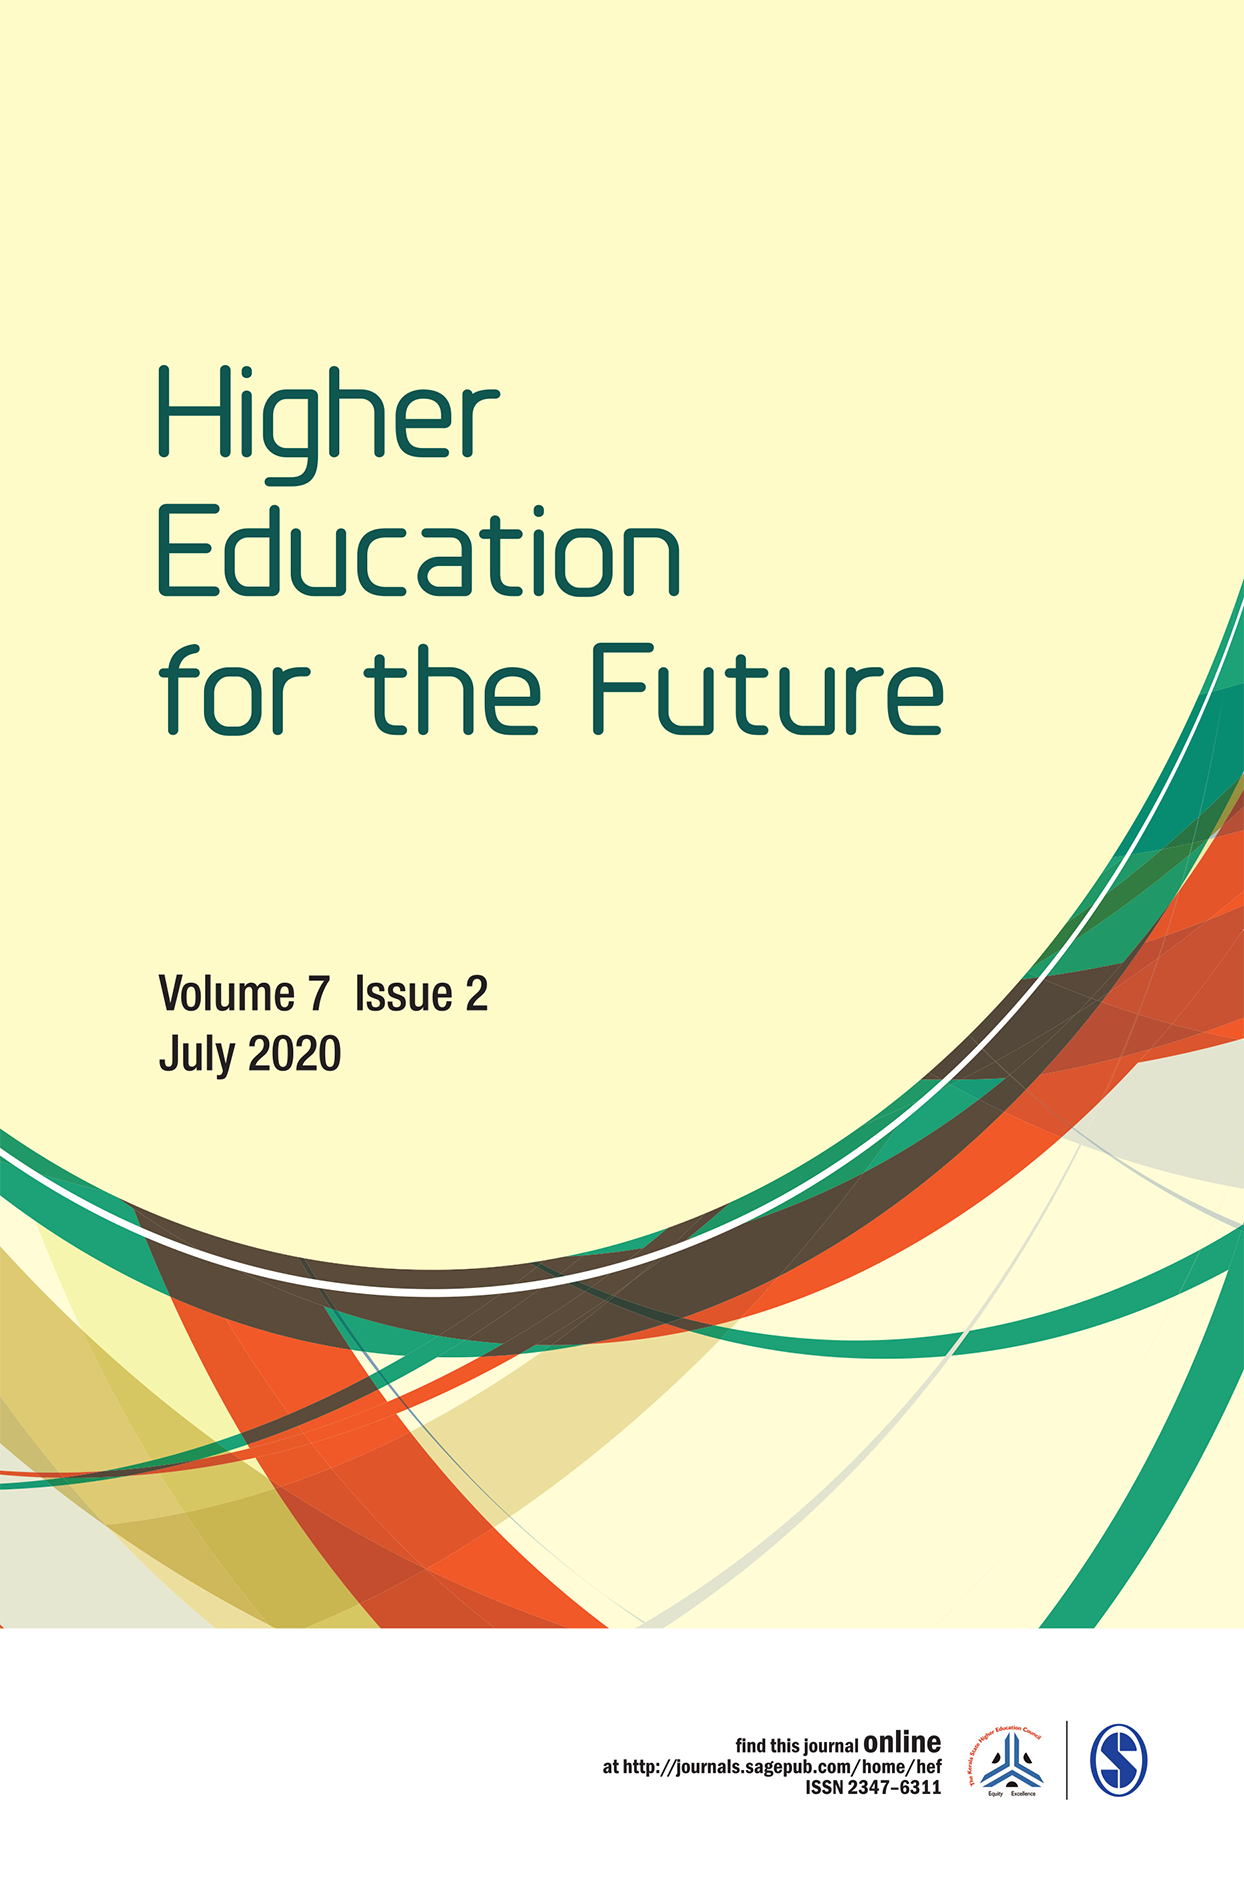 Higher Education for the Future